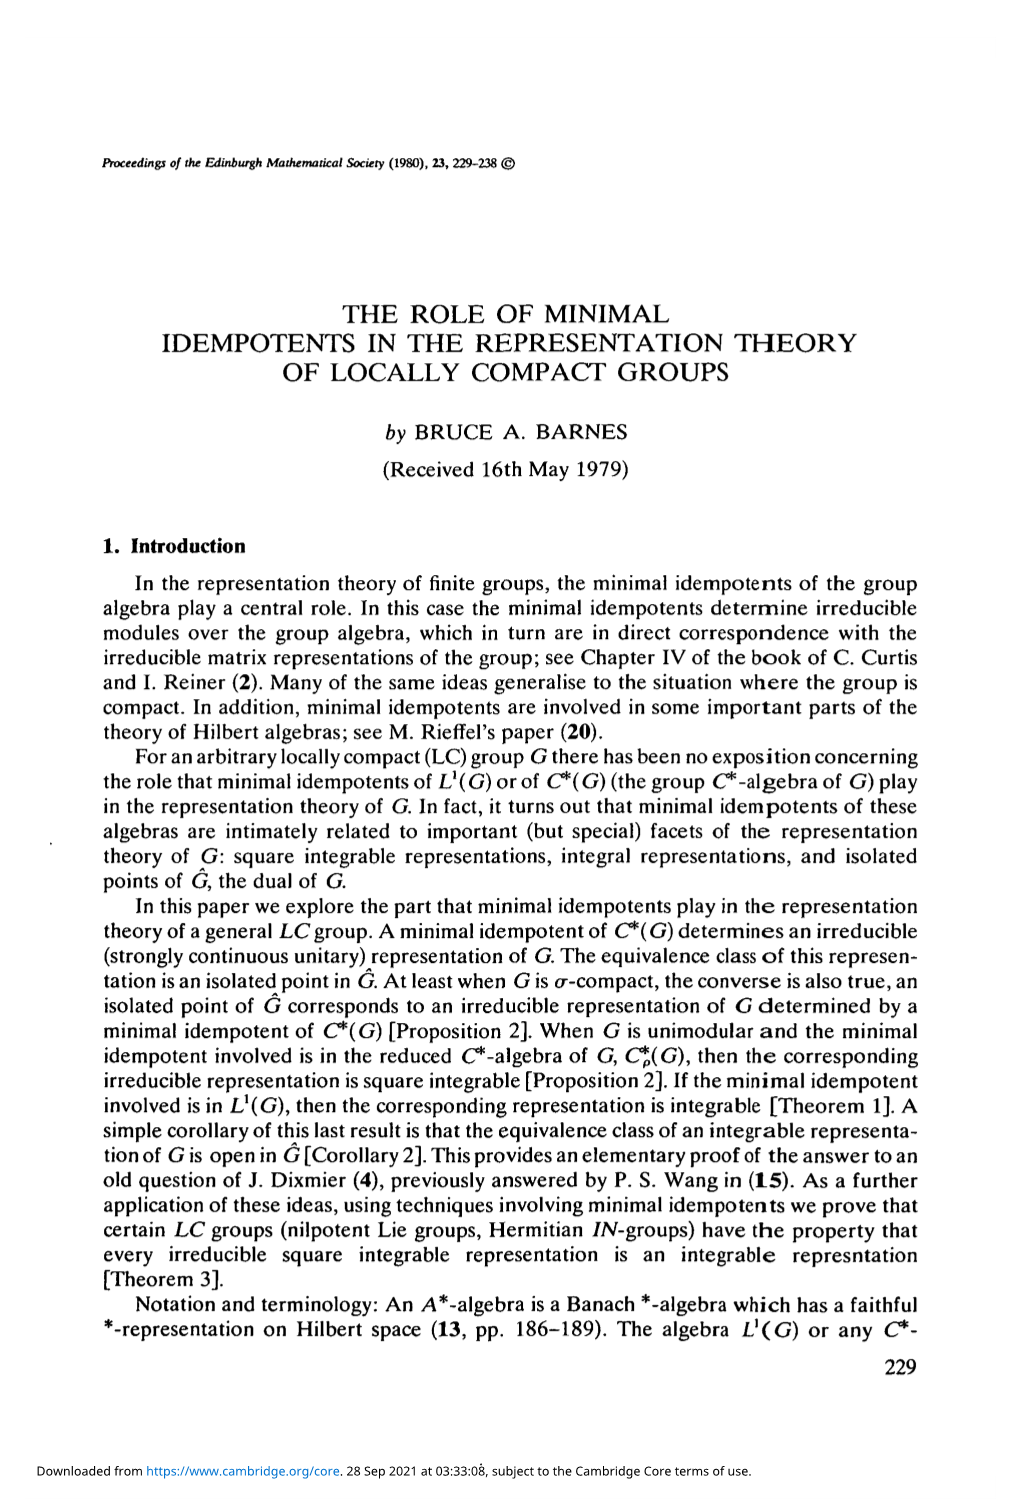 The Role of Minimal Idempotents in the Representation Theory of Locally Compact Groups